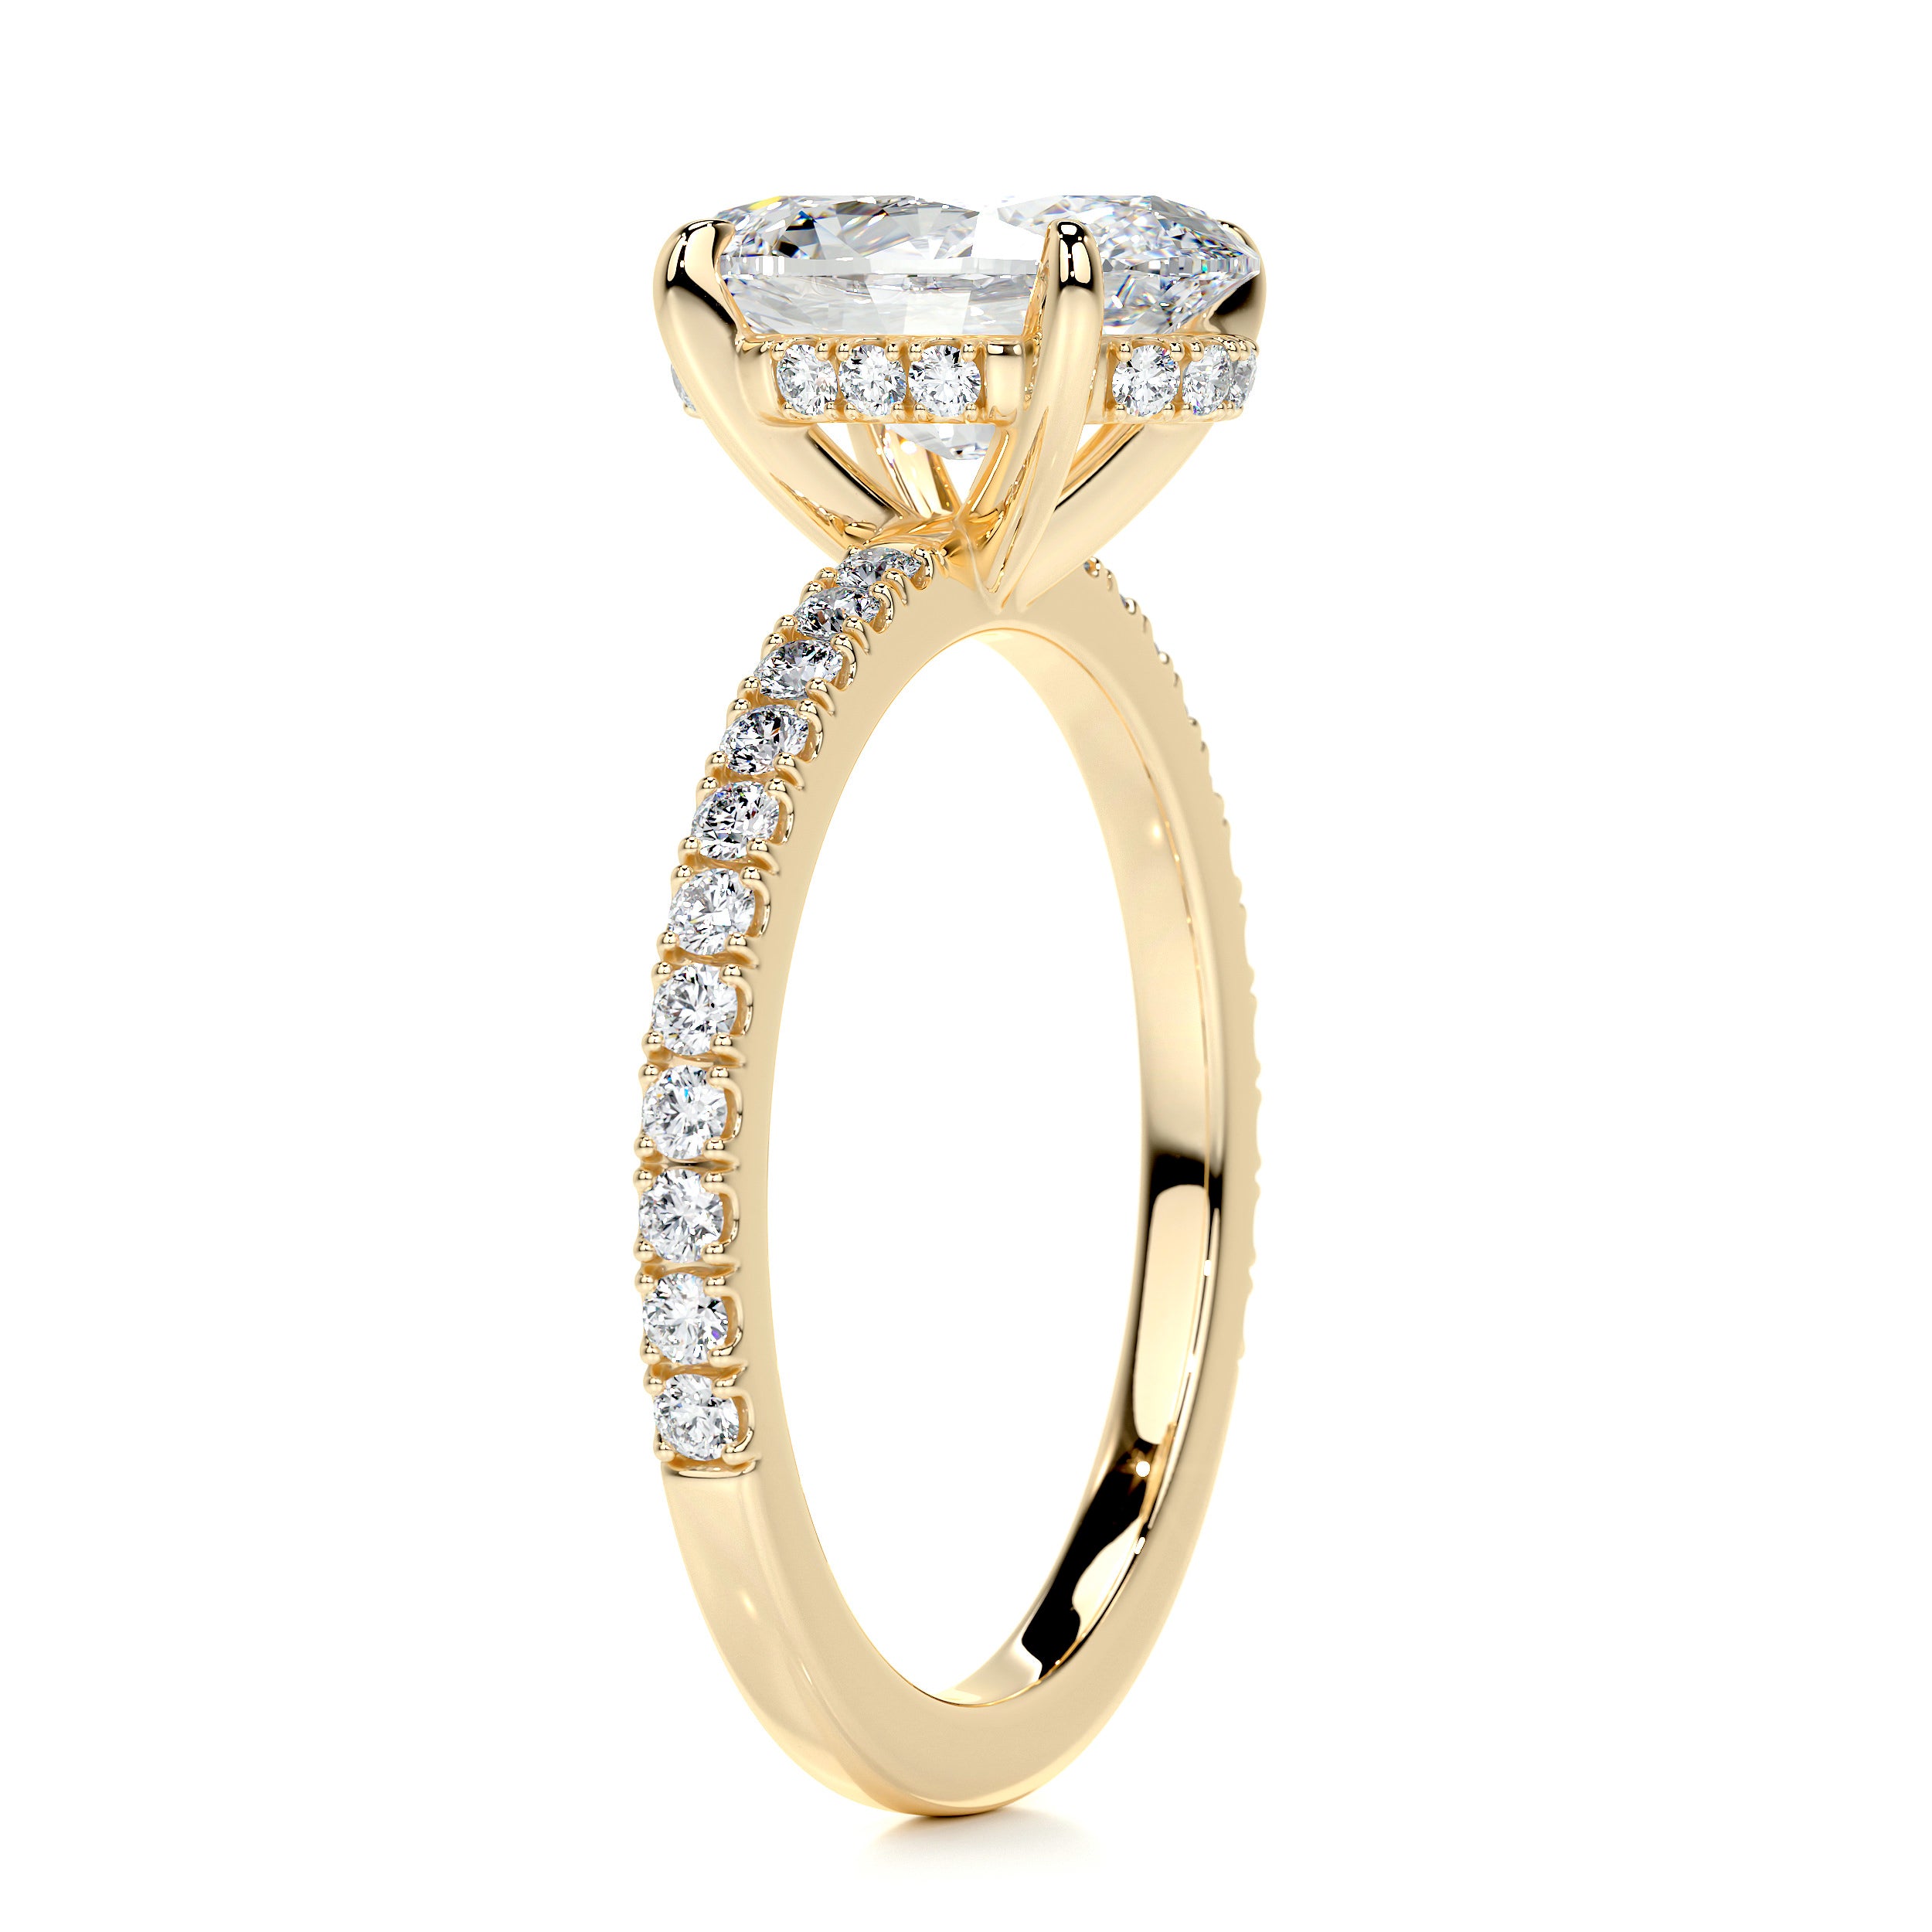 Lucy Diamond Engagement Ring -18K Yellow Gold